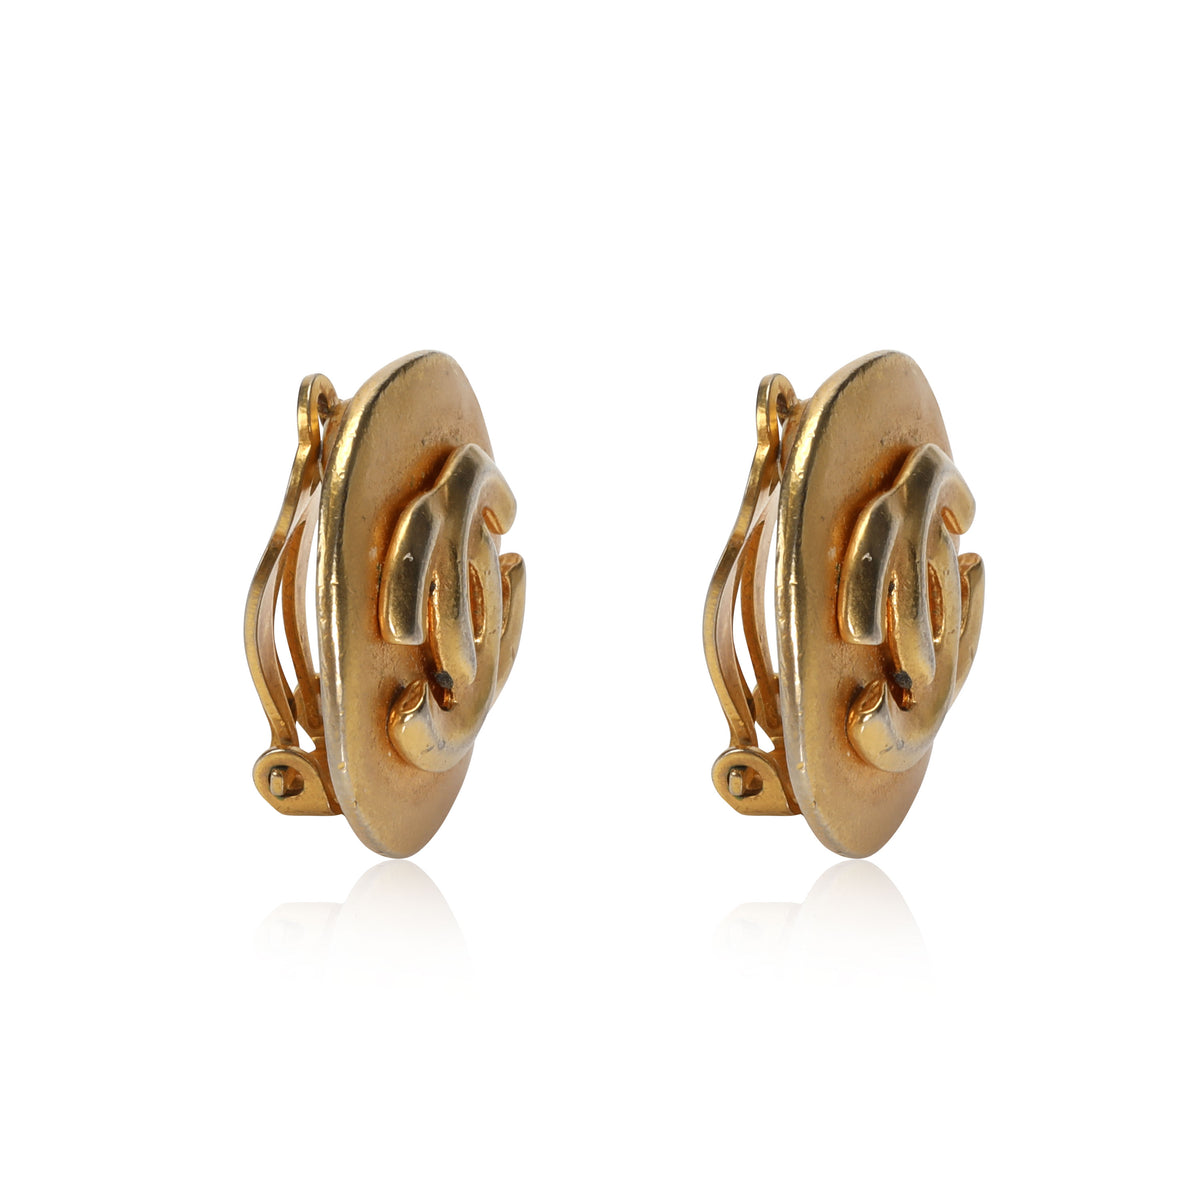 Chanel Spring 1996 CC Button Earrings,  Gold Toned